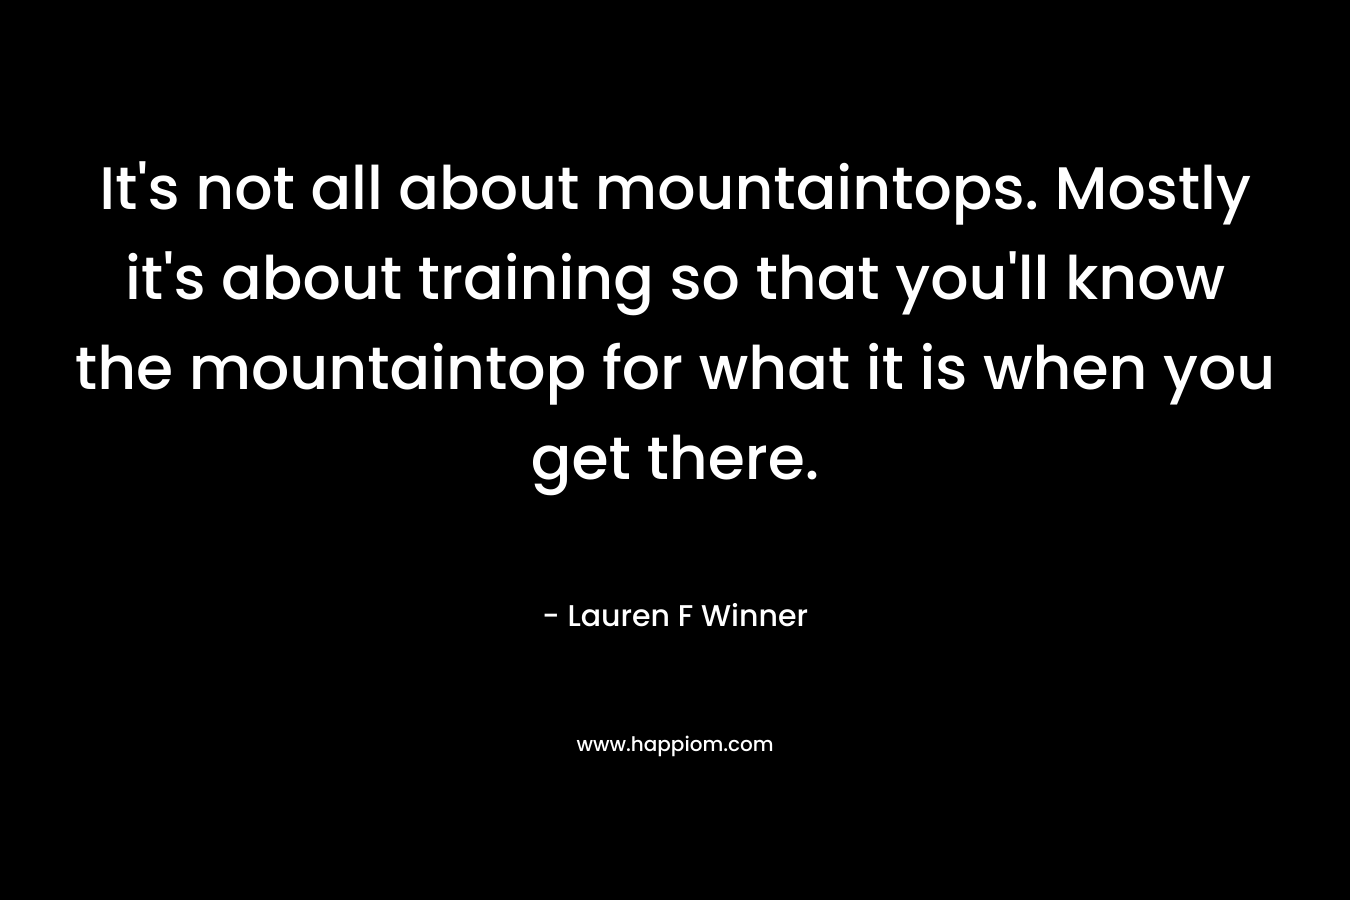 It’s not all about mountaintops. Mostly it’s about training so that you’ll know the mountaintop for what it is when you get there. – Lauren F Winner